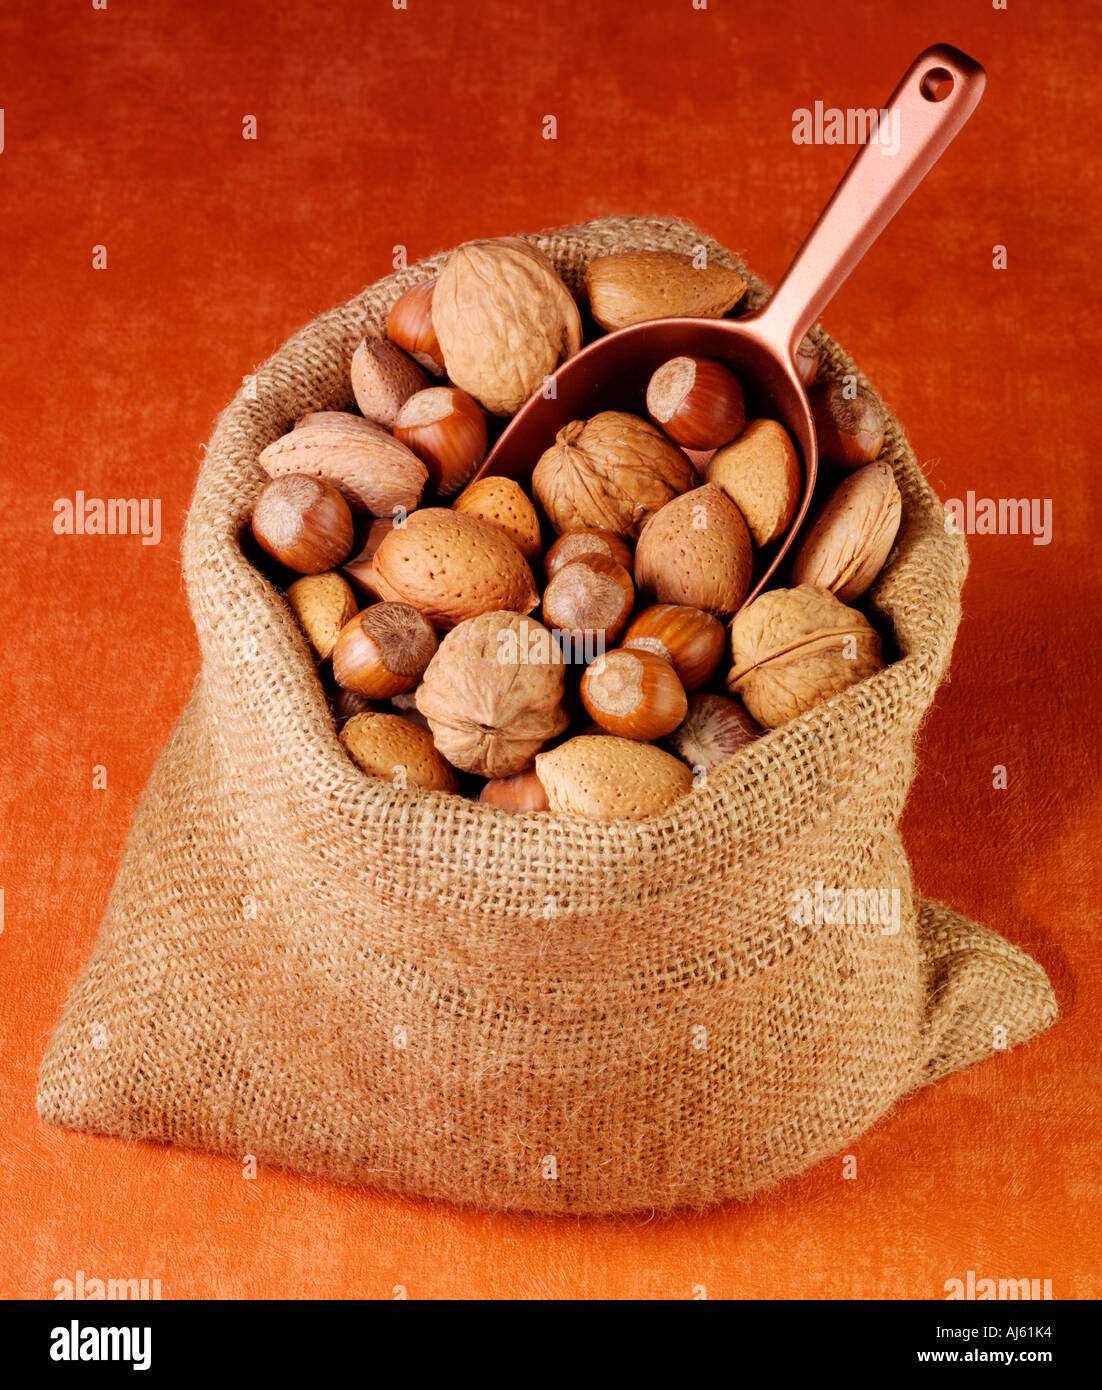 SACK OF MIXED NUTS Stock Photo